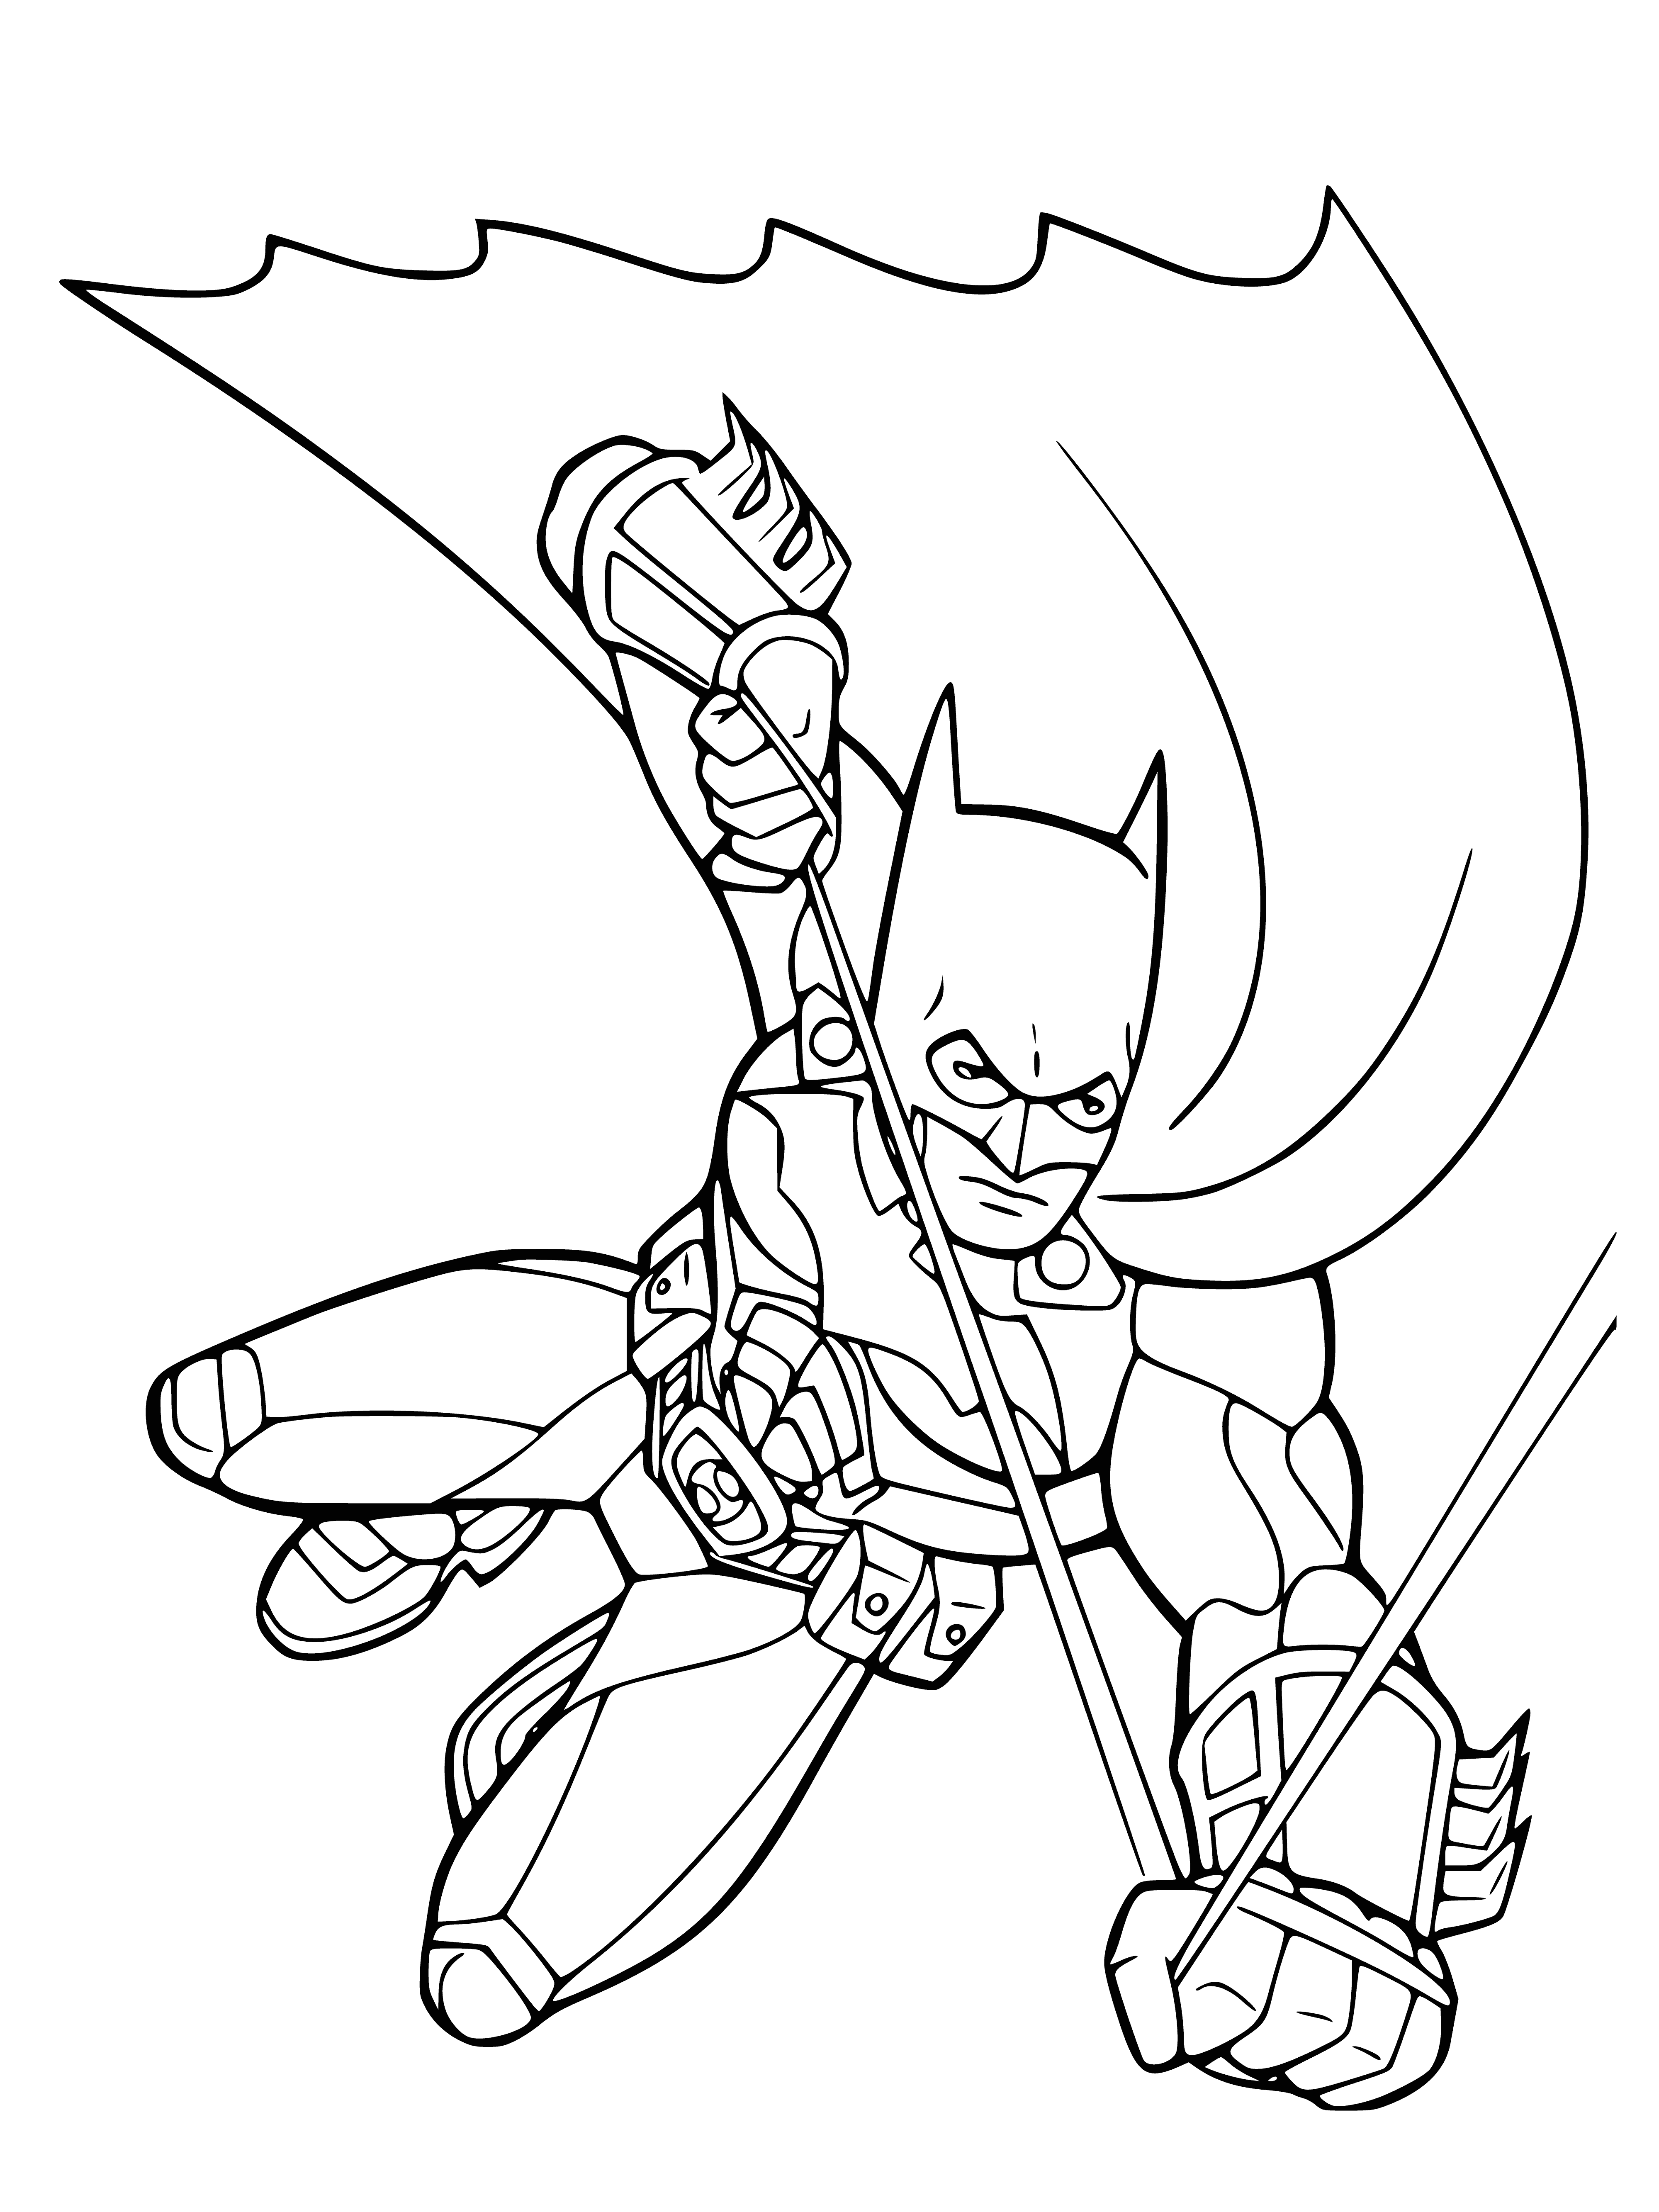 coloring page: 3 figures in Batman costumes on a city street w/ tall buildings & a large black Bat symbol on yellow bg. Words "Batman" above it in black.